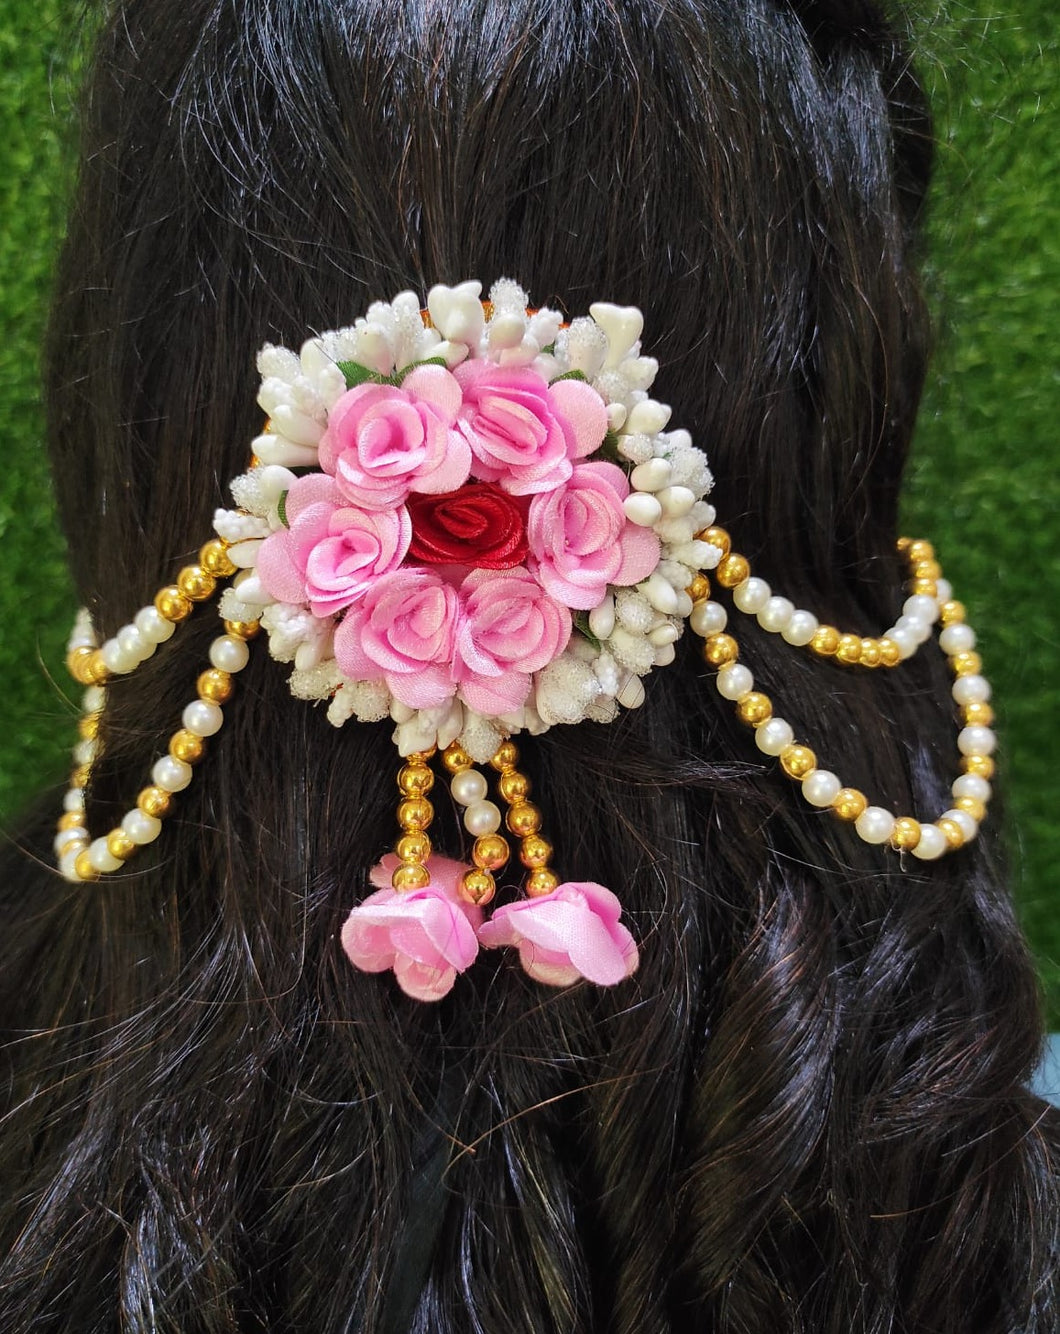 Artificial Flower Hair Accessories - South India Jewels